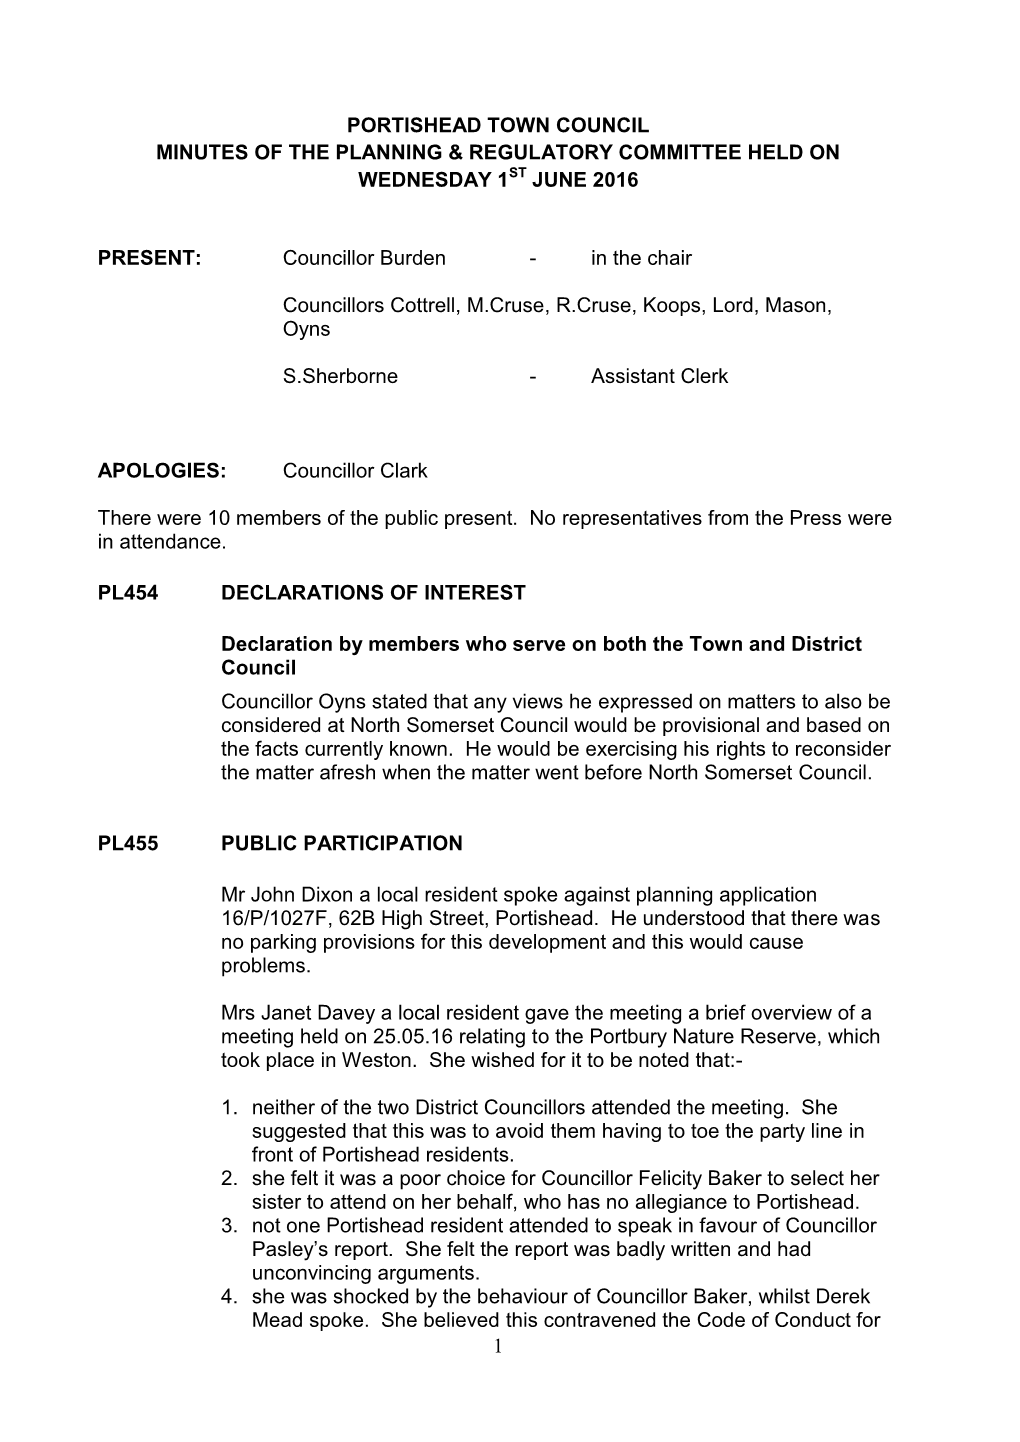 1 Portishead Town Council Minutes of the Planning